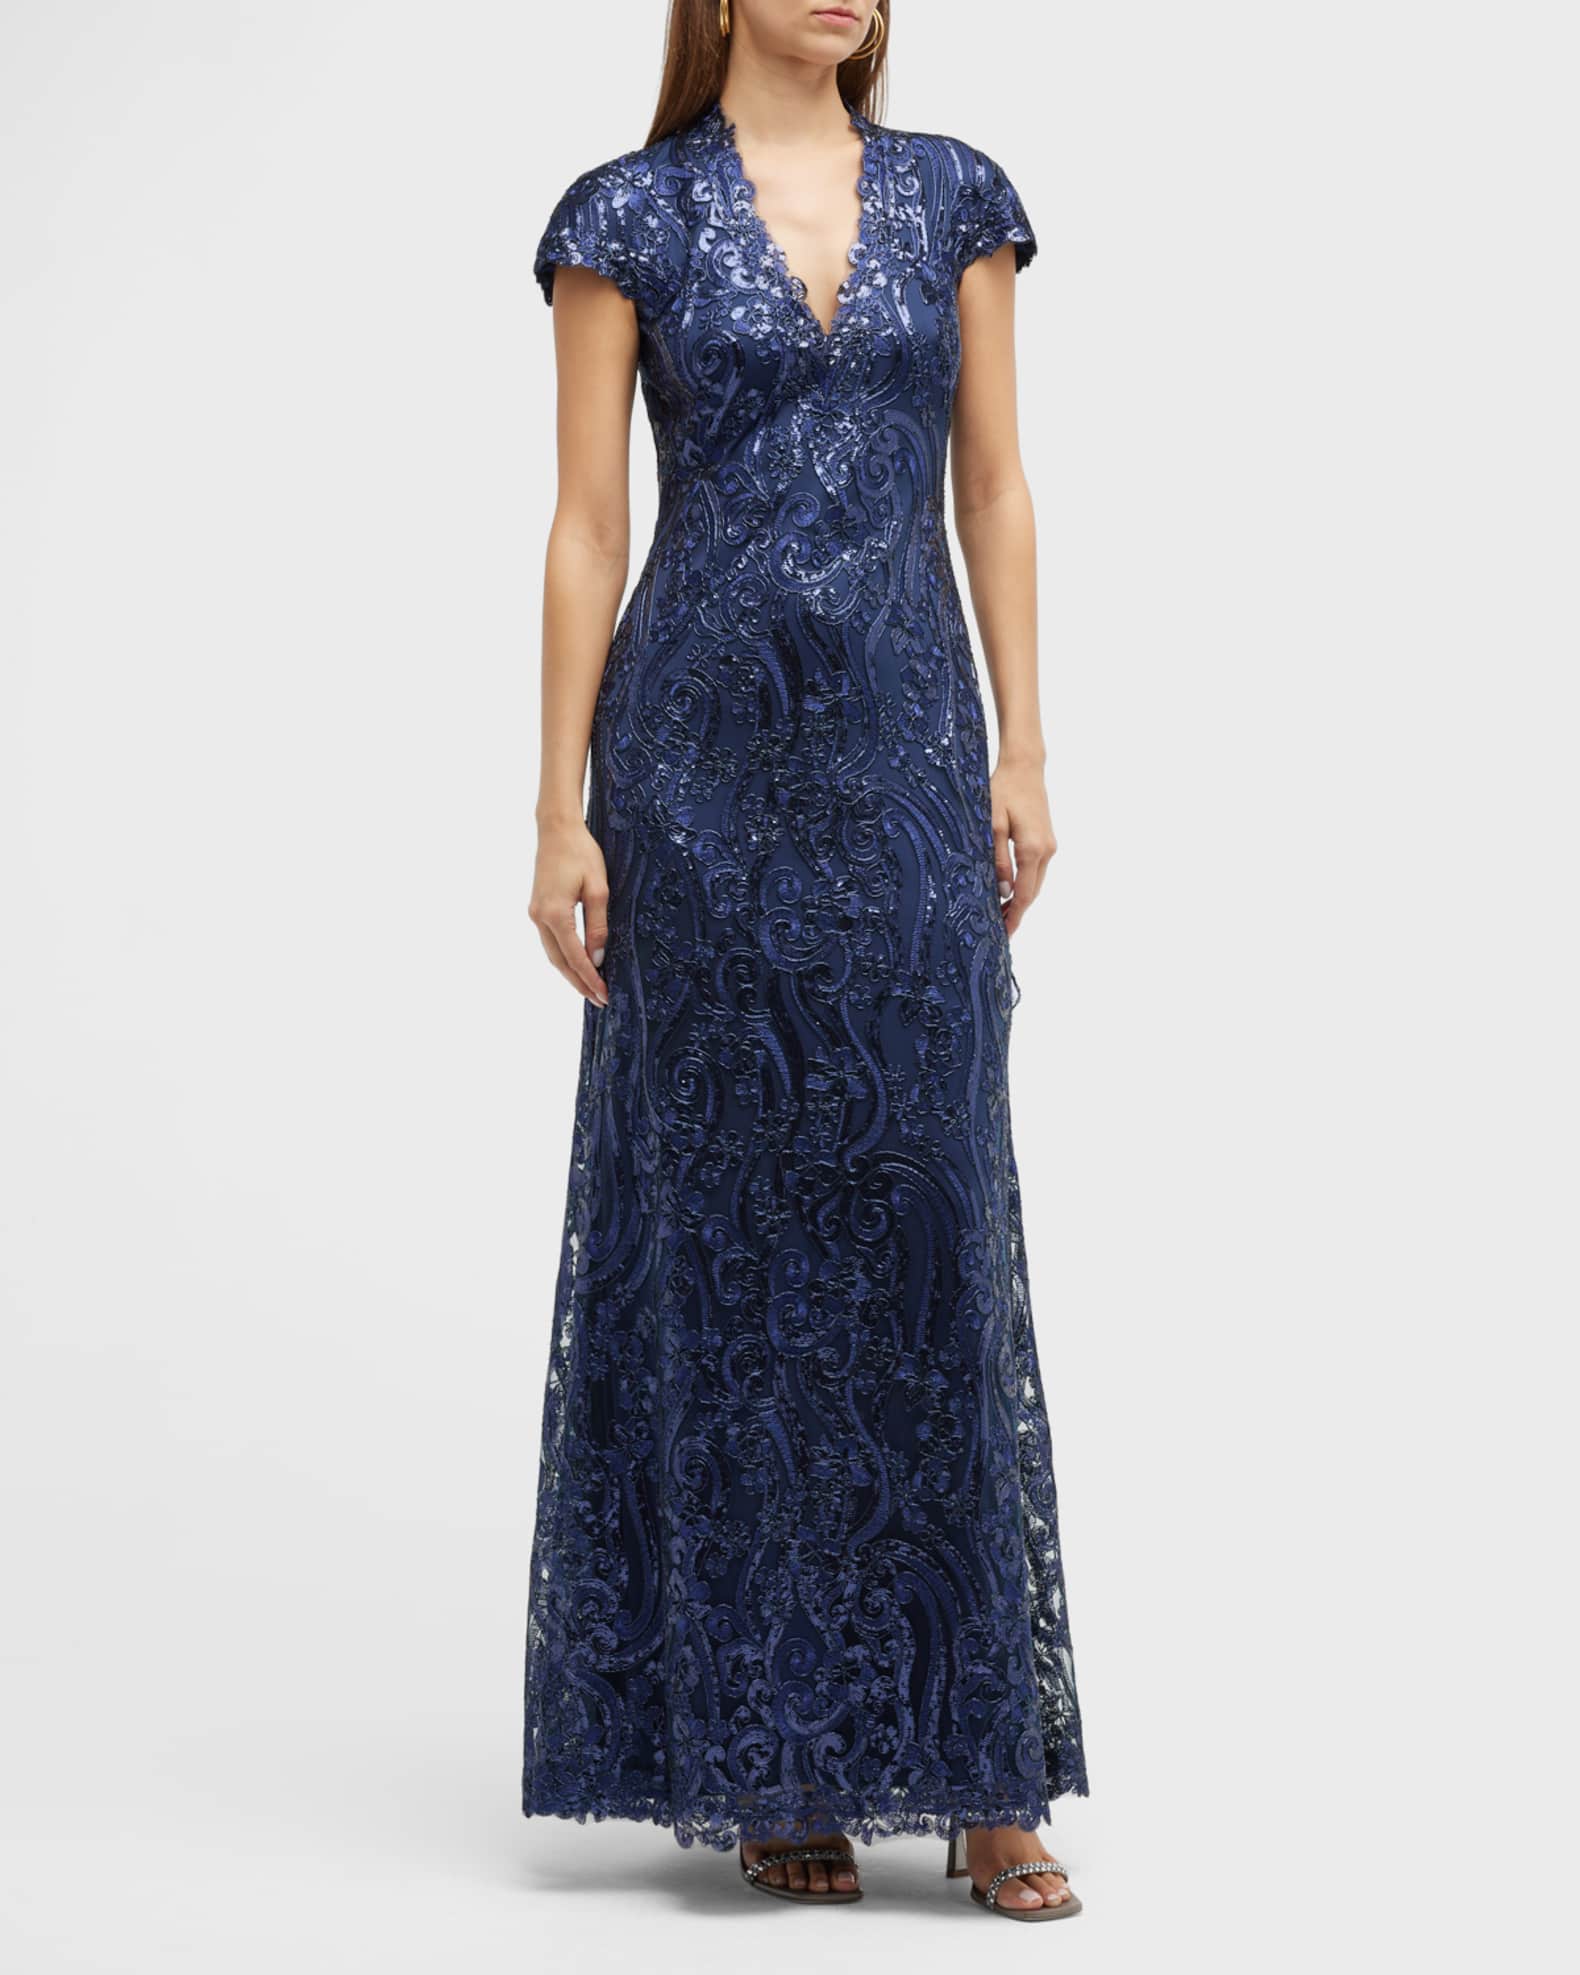 Tadashi Shoji Embroidered Sequin-Embellished Tulle Gown | Neiman Marcus